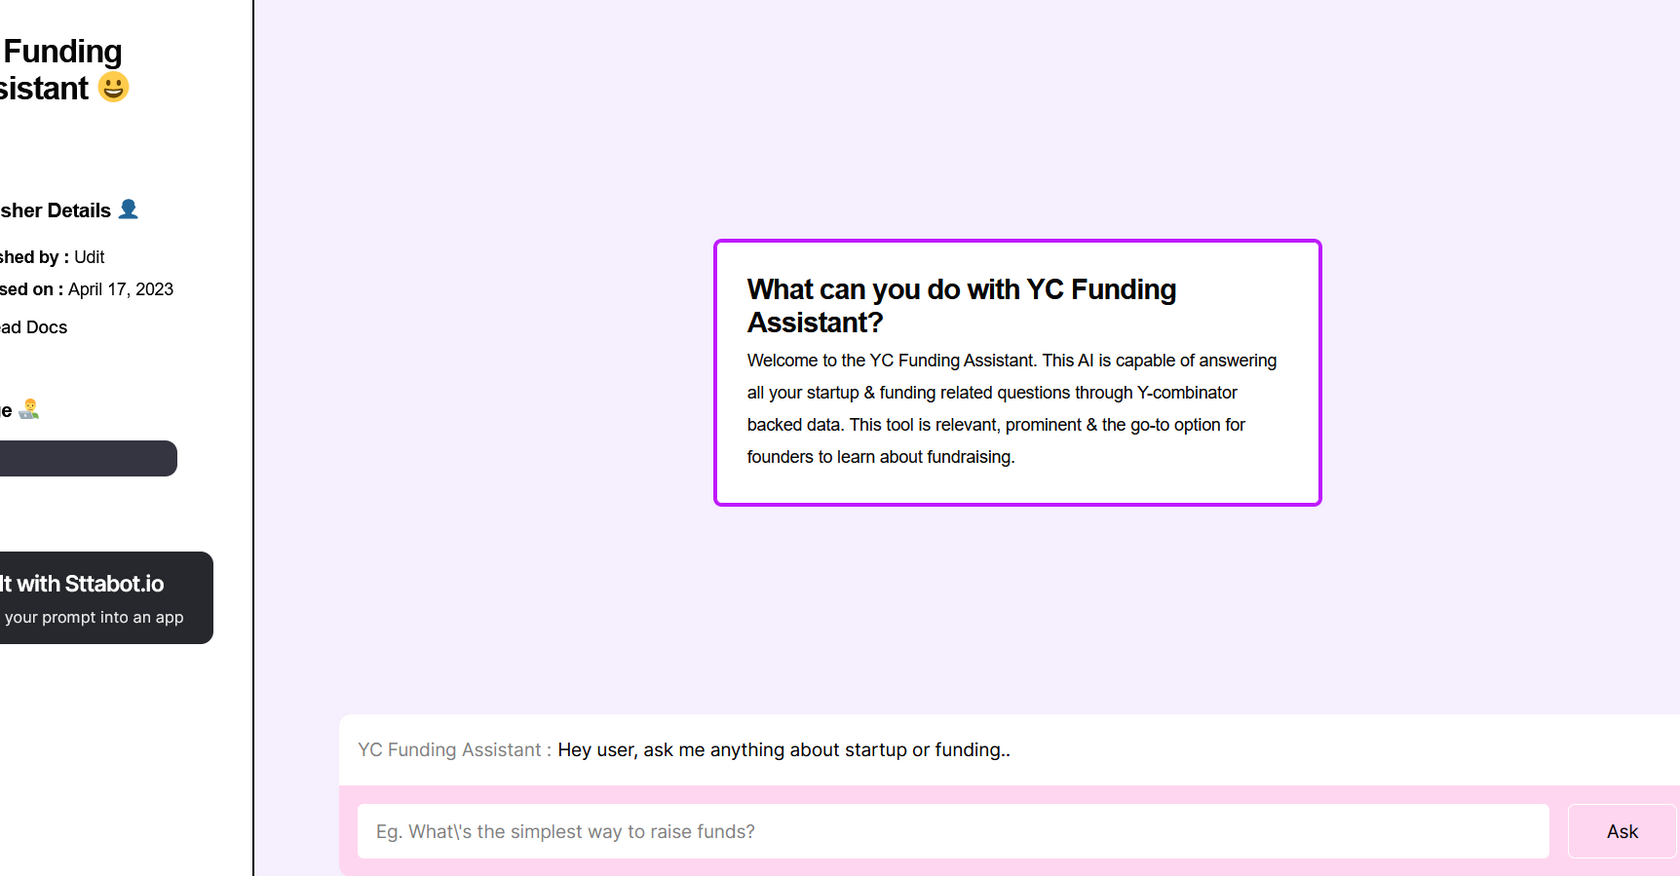 YC Funding Assistant